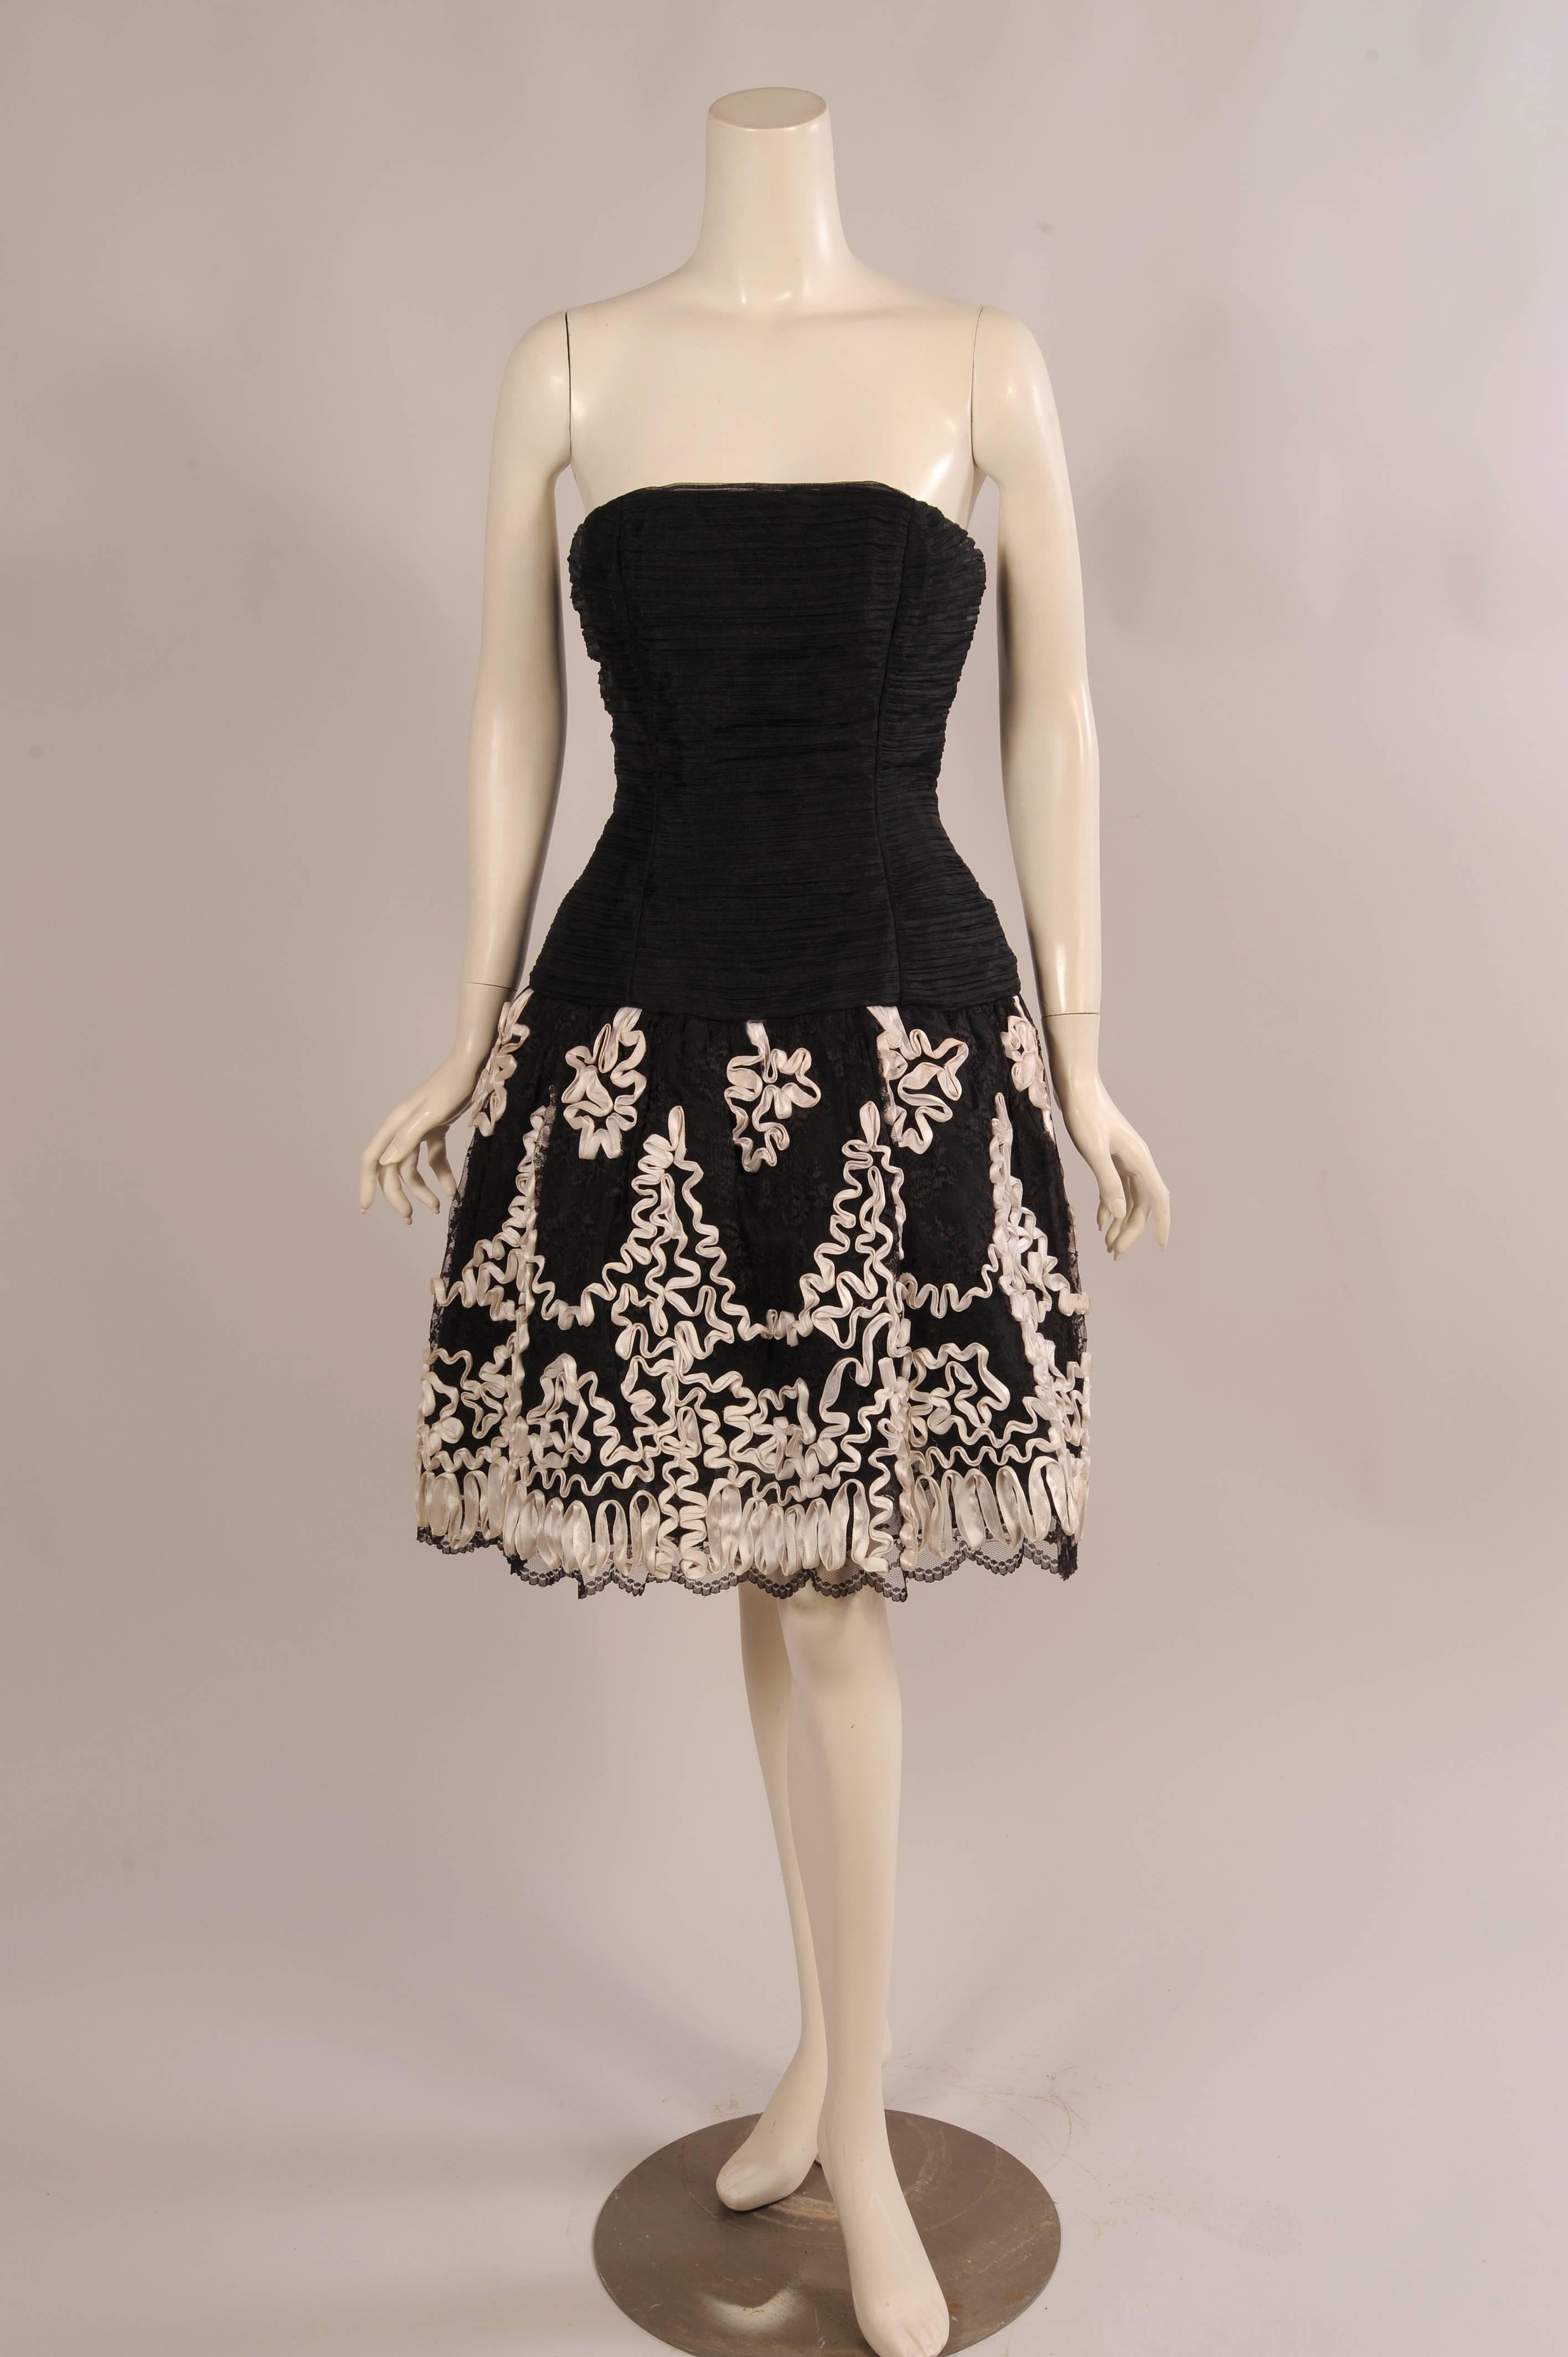 This flirty little evening dress was designed by Victor Costa for Saks Fifth Avenue. The strapless dress has a fitted organza bodice with a dropped waistline. The full skirt is black lace embellished with white satin ribbon soutache over an organza